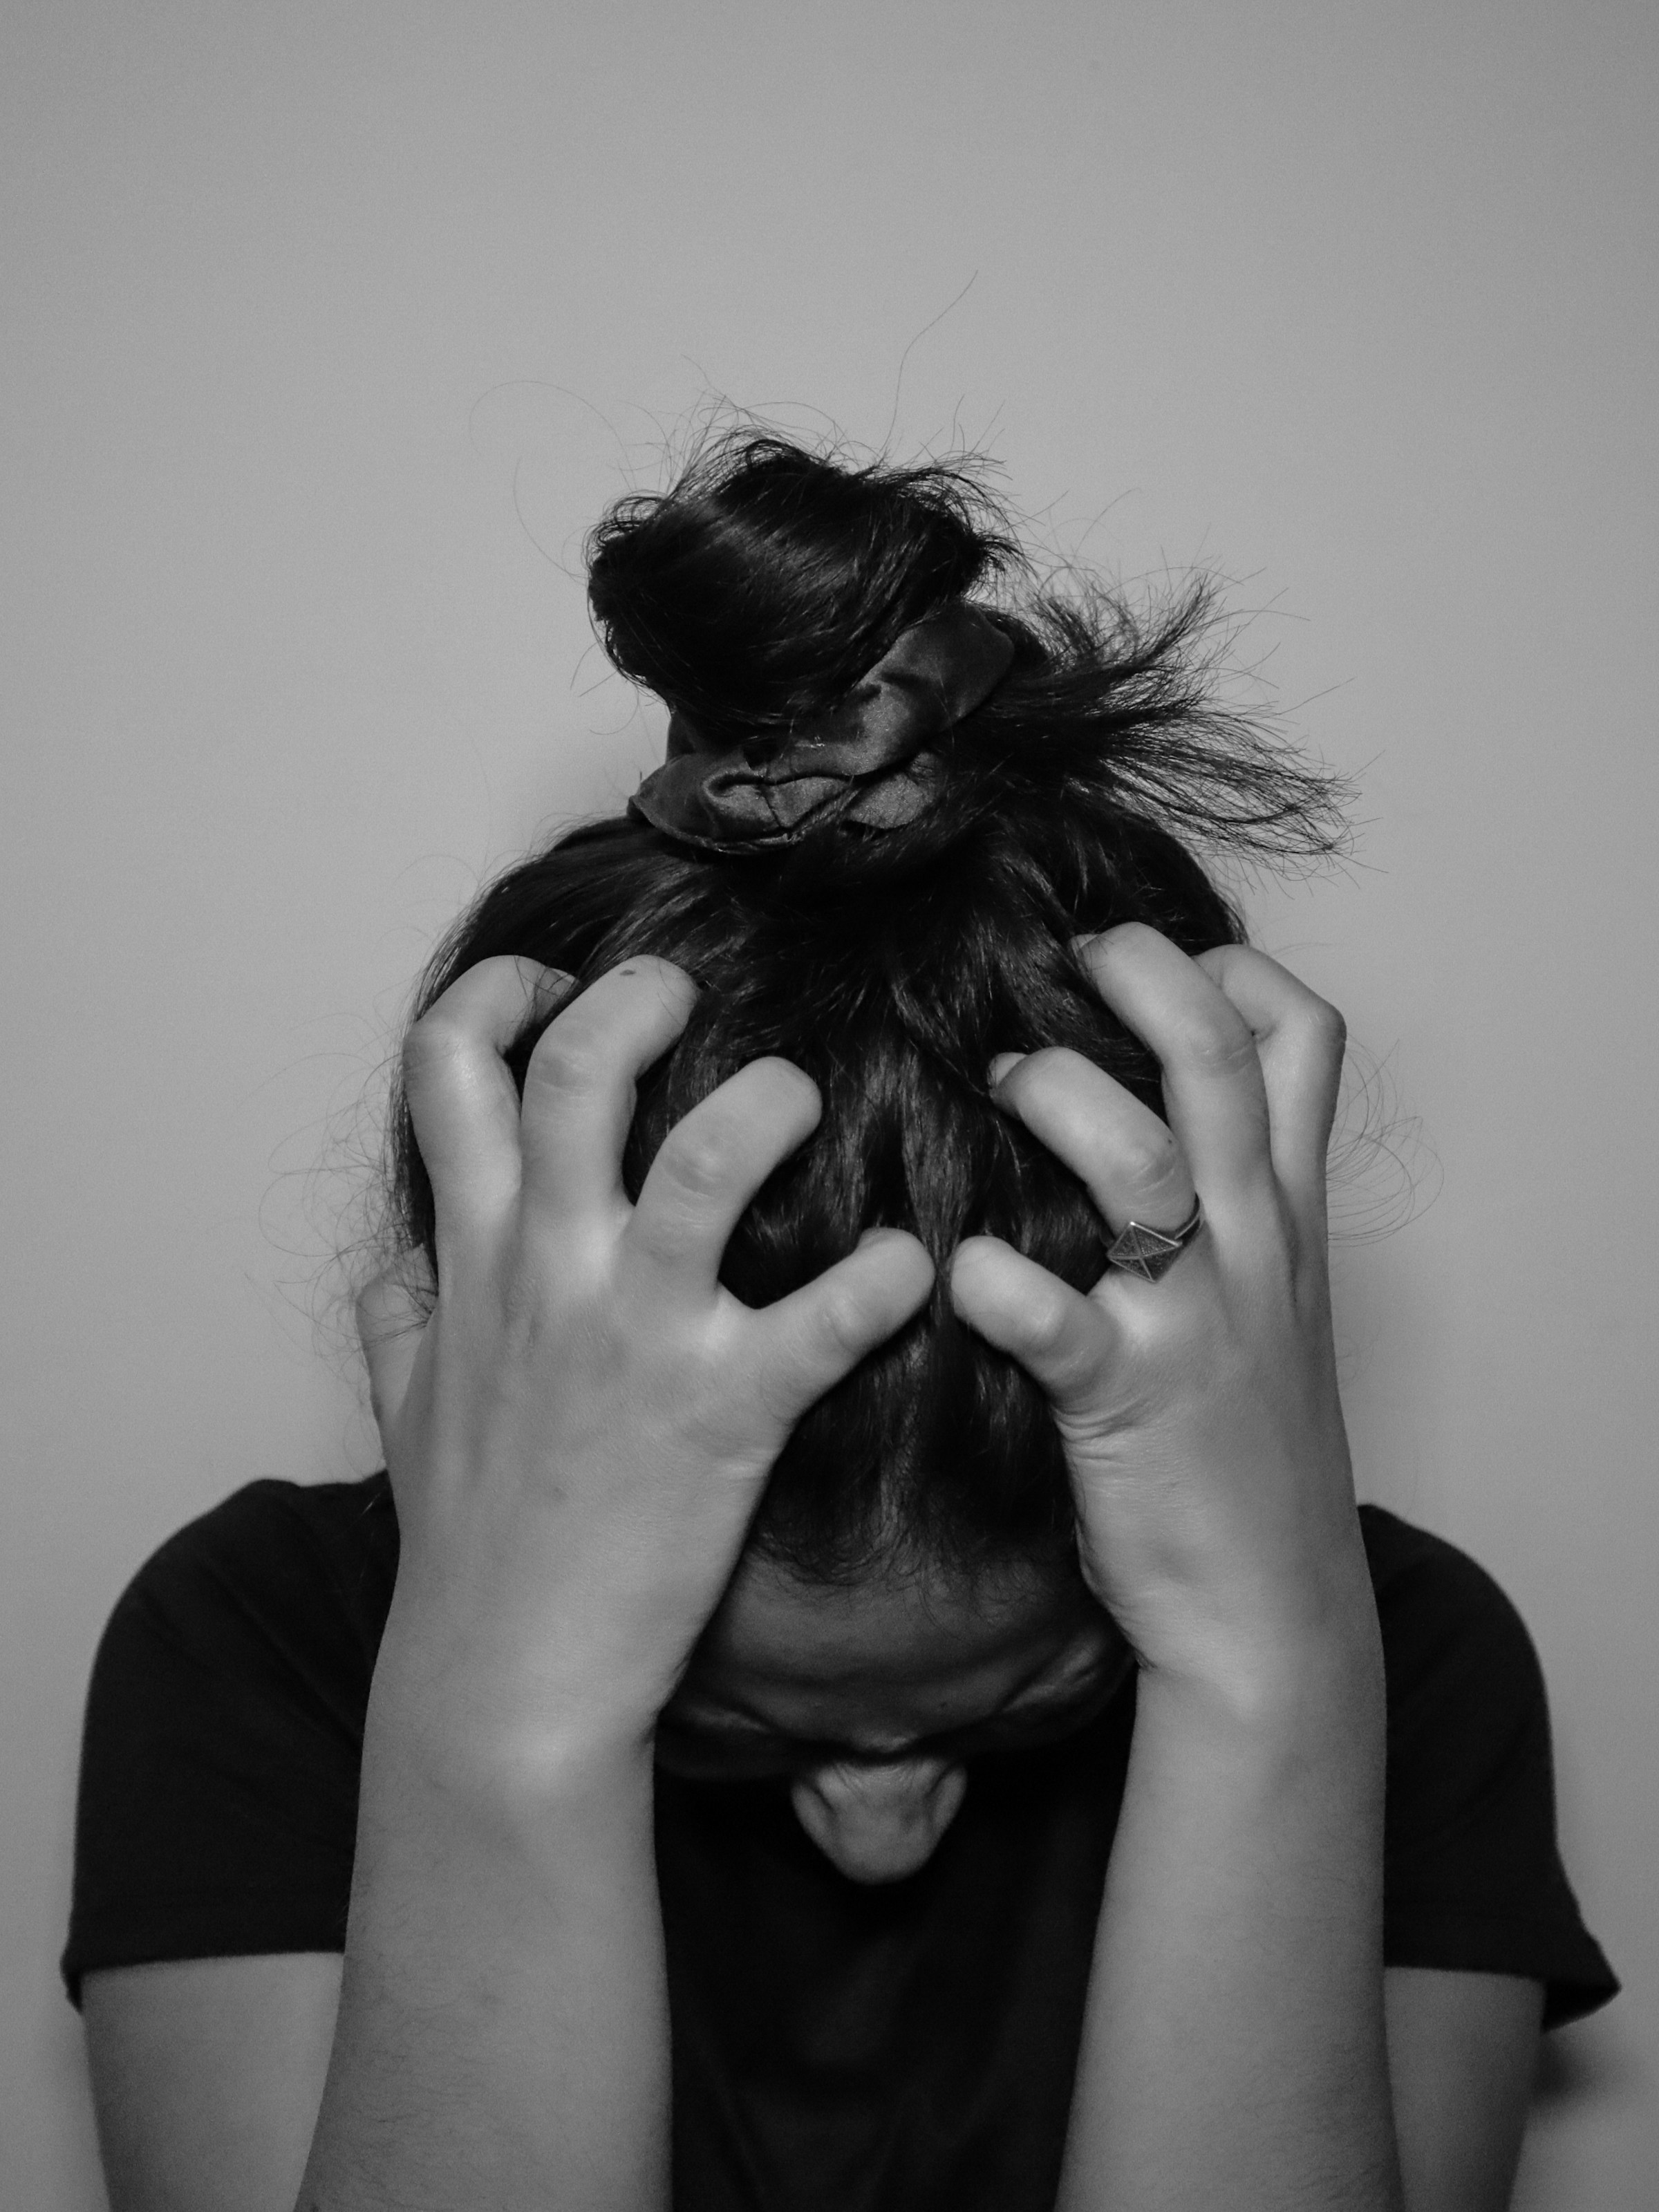 A woman covering her face with her hands | Source: Unsplash